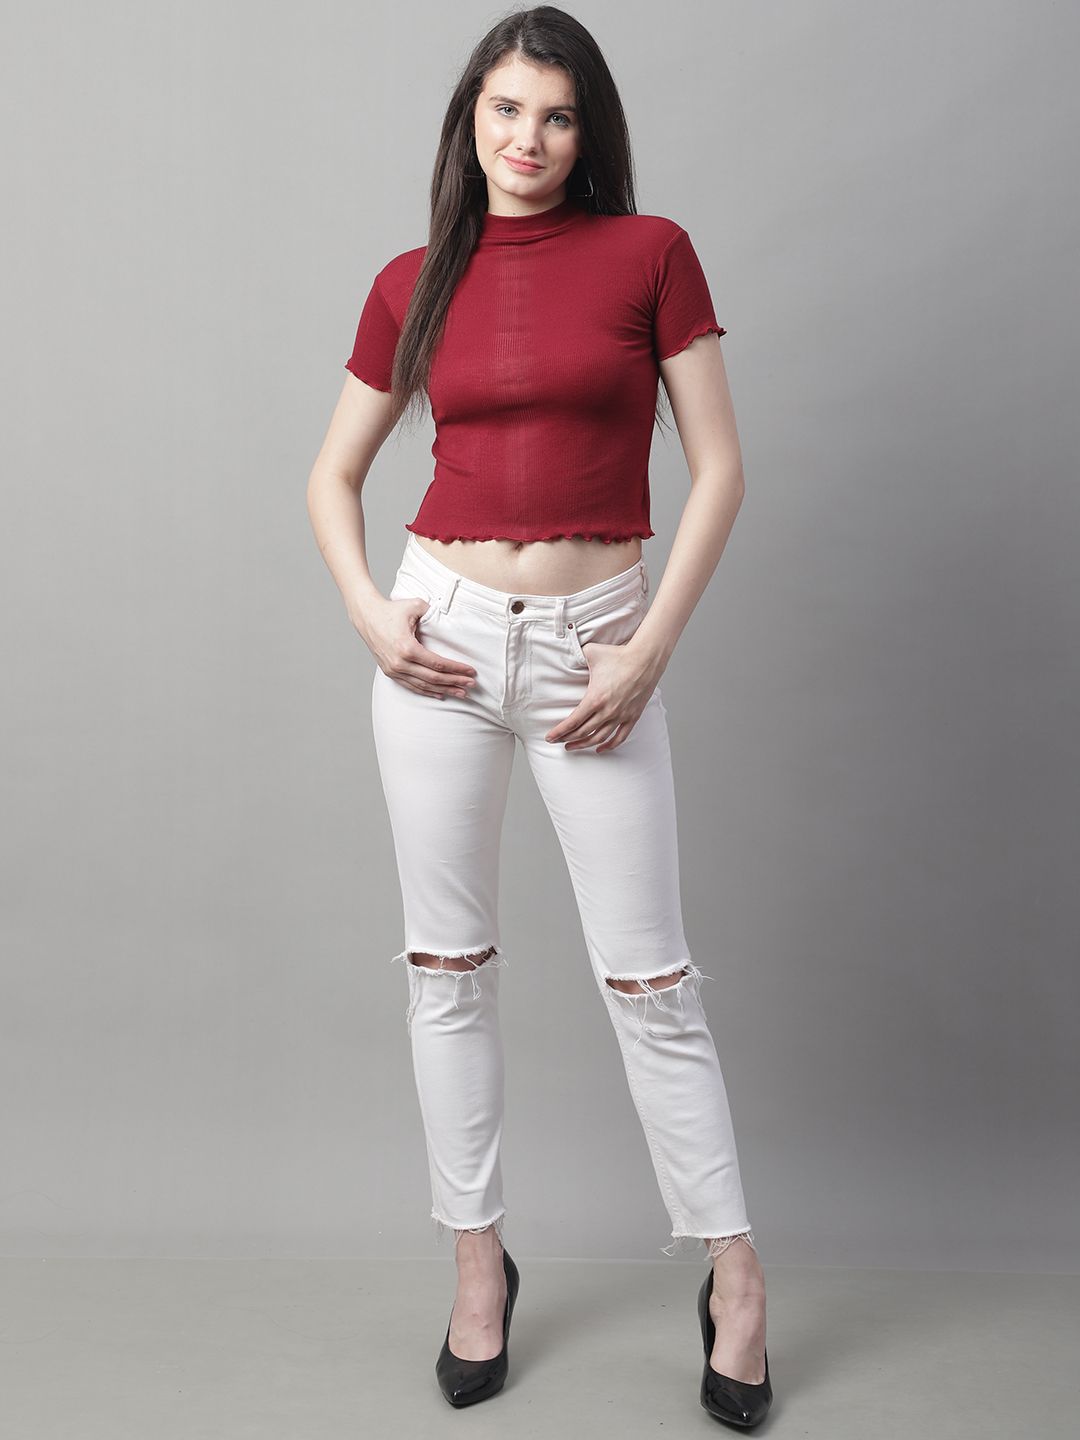 Maroon Turtle-Neck Crop Top with Lettuce Edge